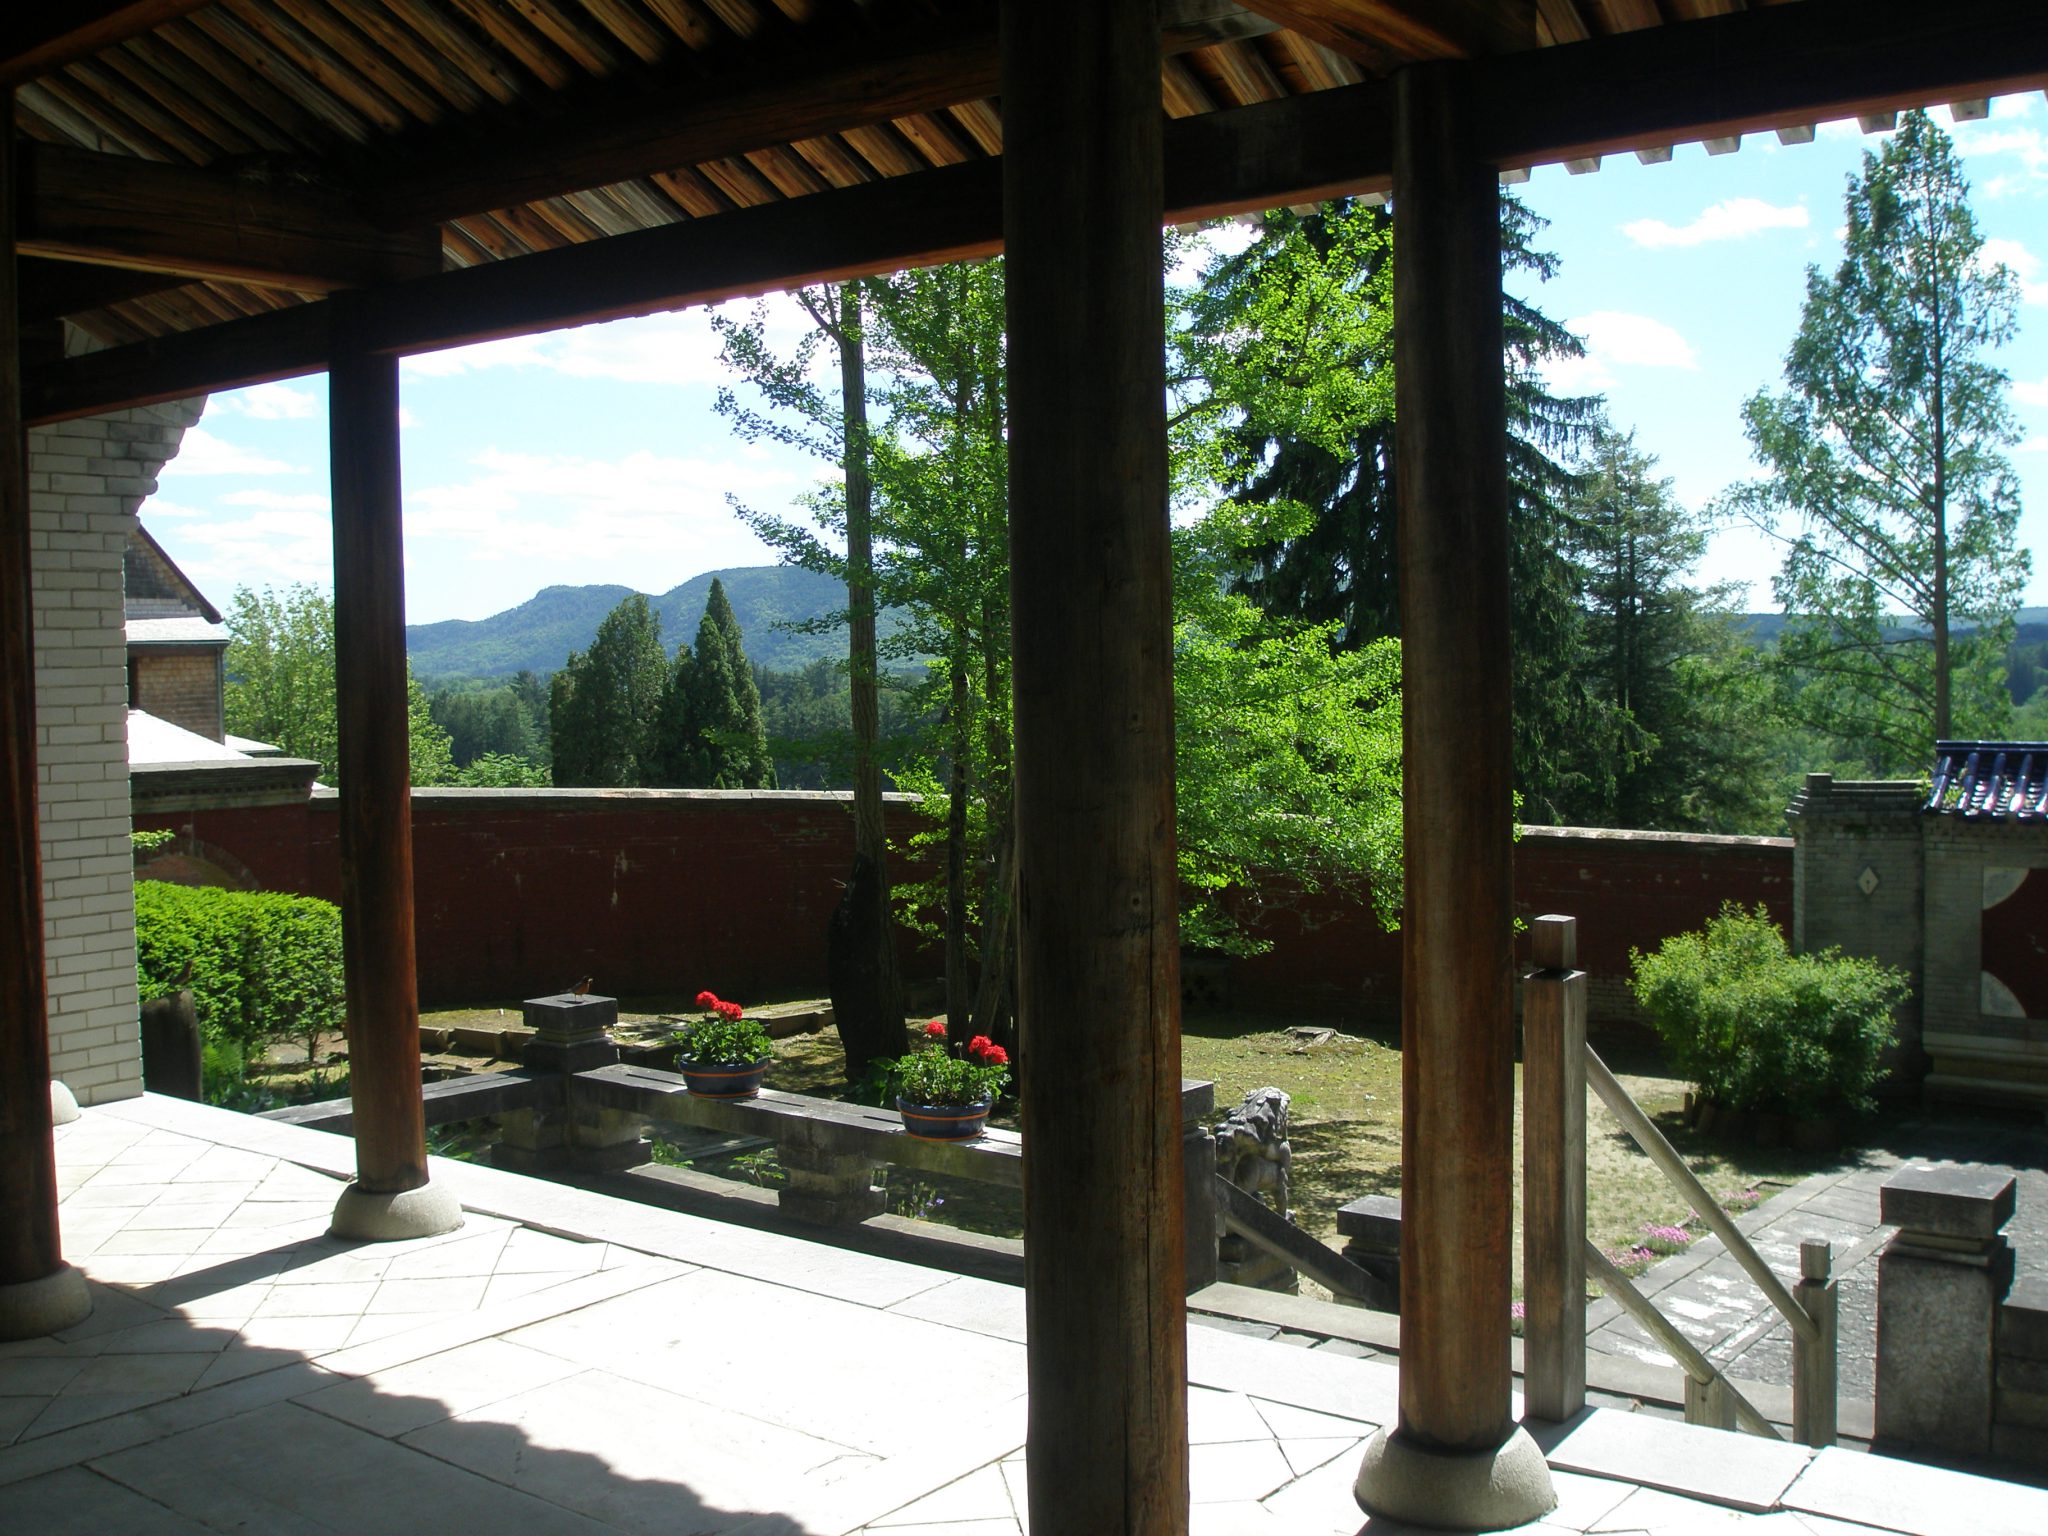 Another view from the Temple